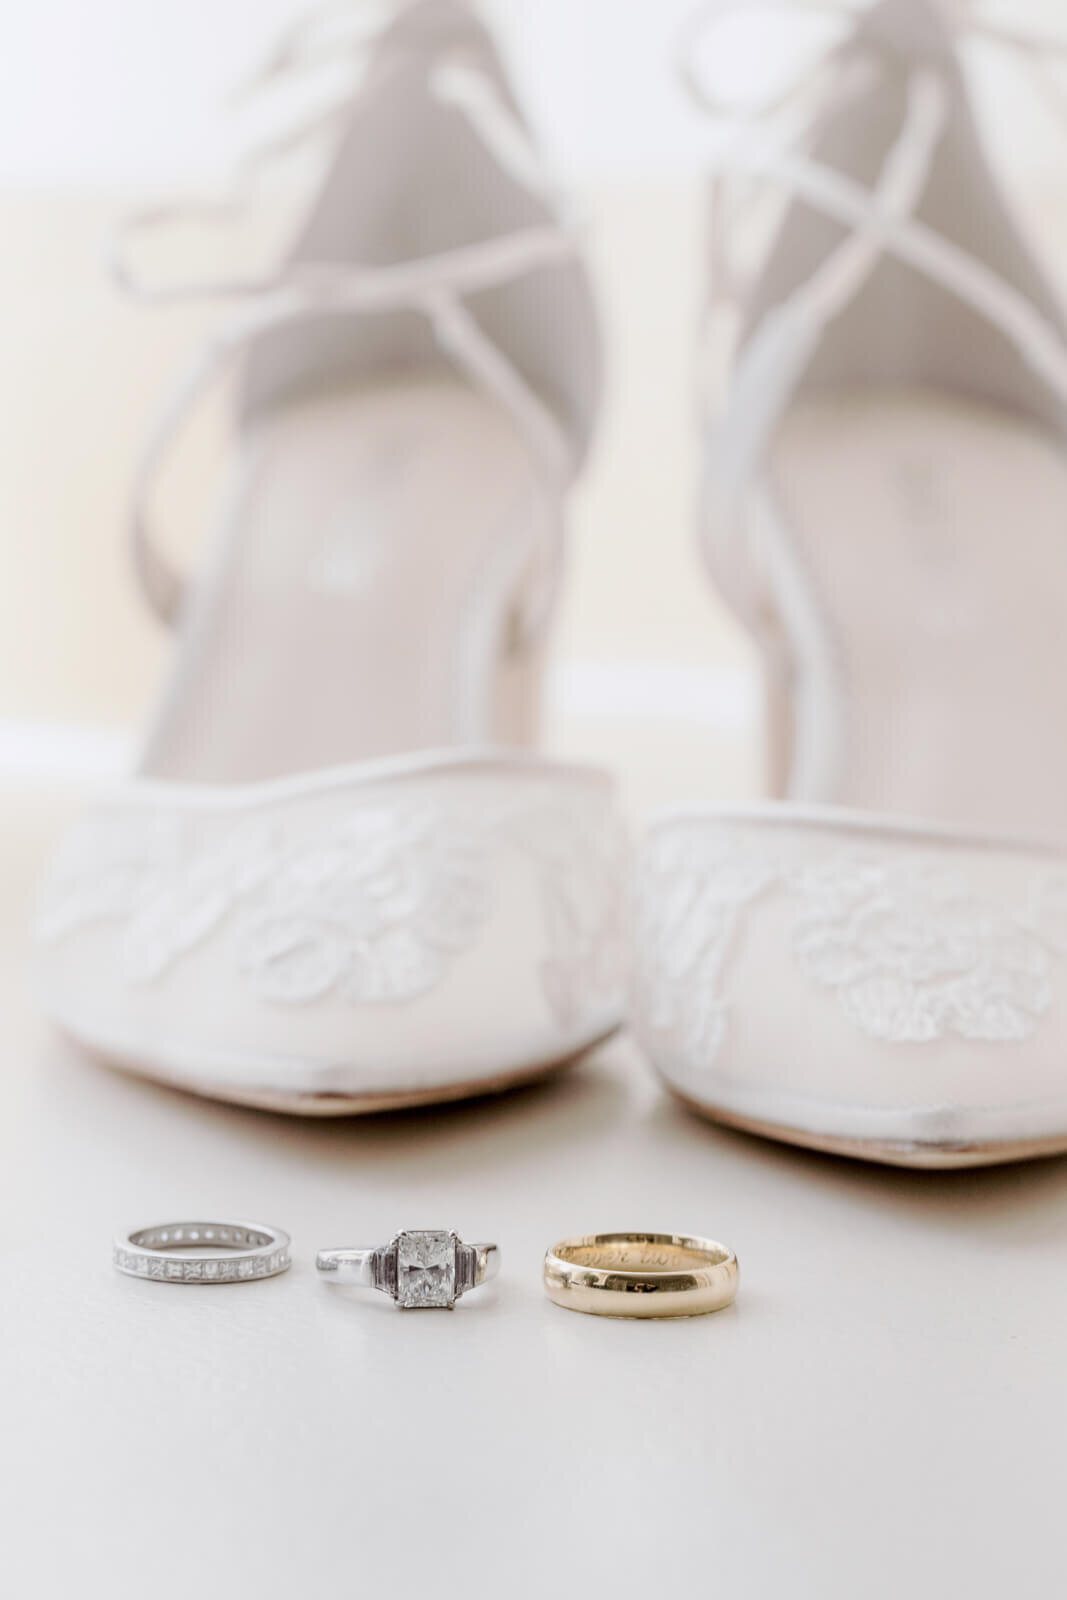 A pair of white wedding shoes, a silver ring with small diamonds, a silver ring with a diamond in the middle, and a gold ring